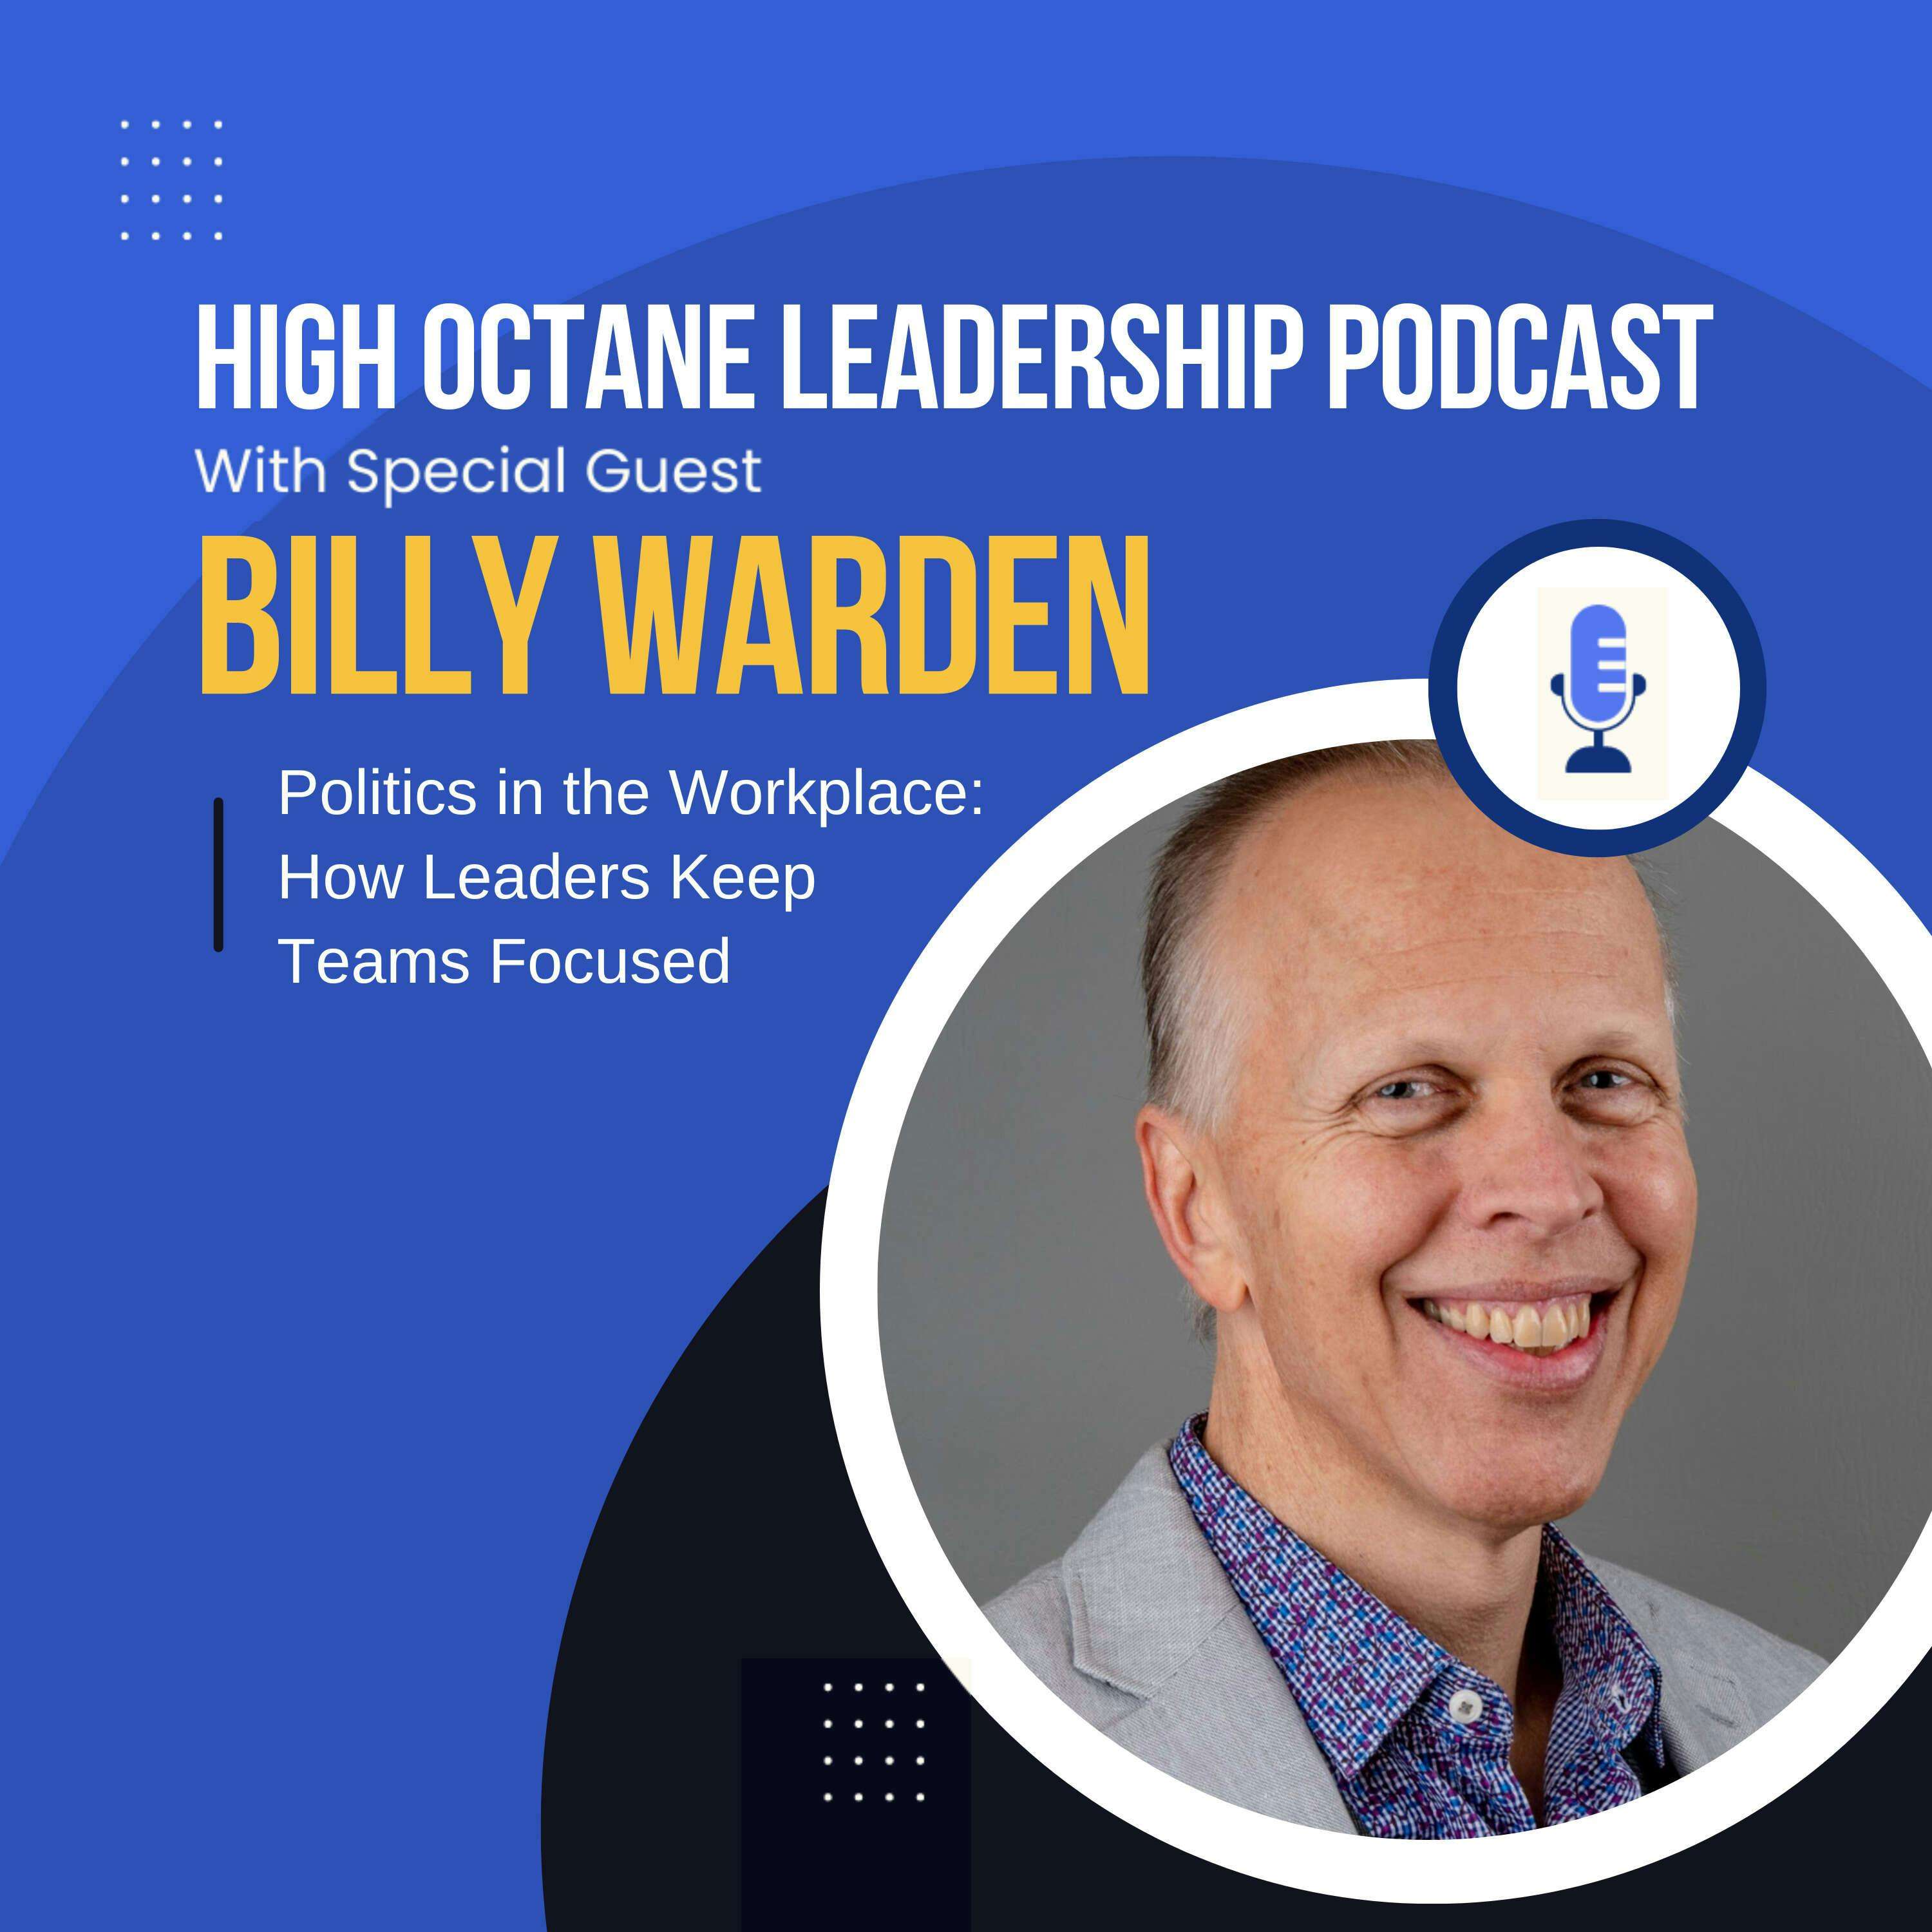 Politics in the Workplace: How Leaders Keep Teams Focused, with Billy Warden